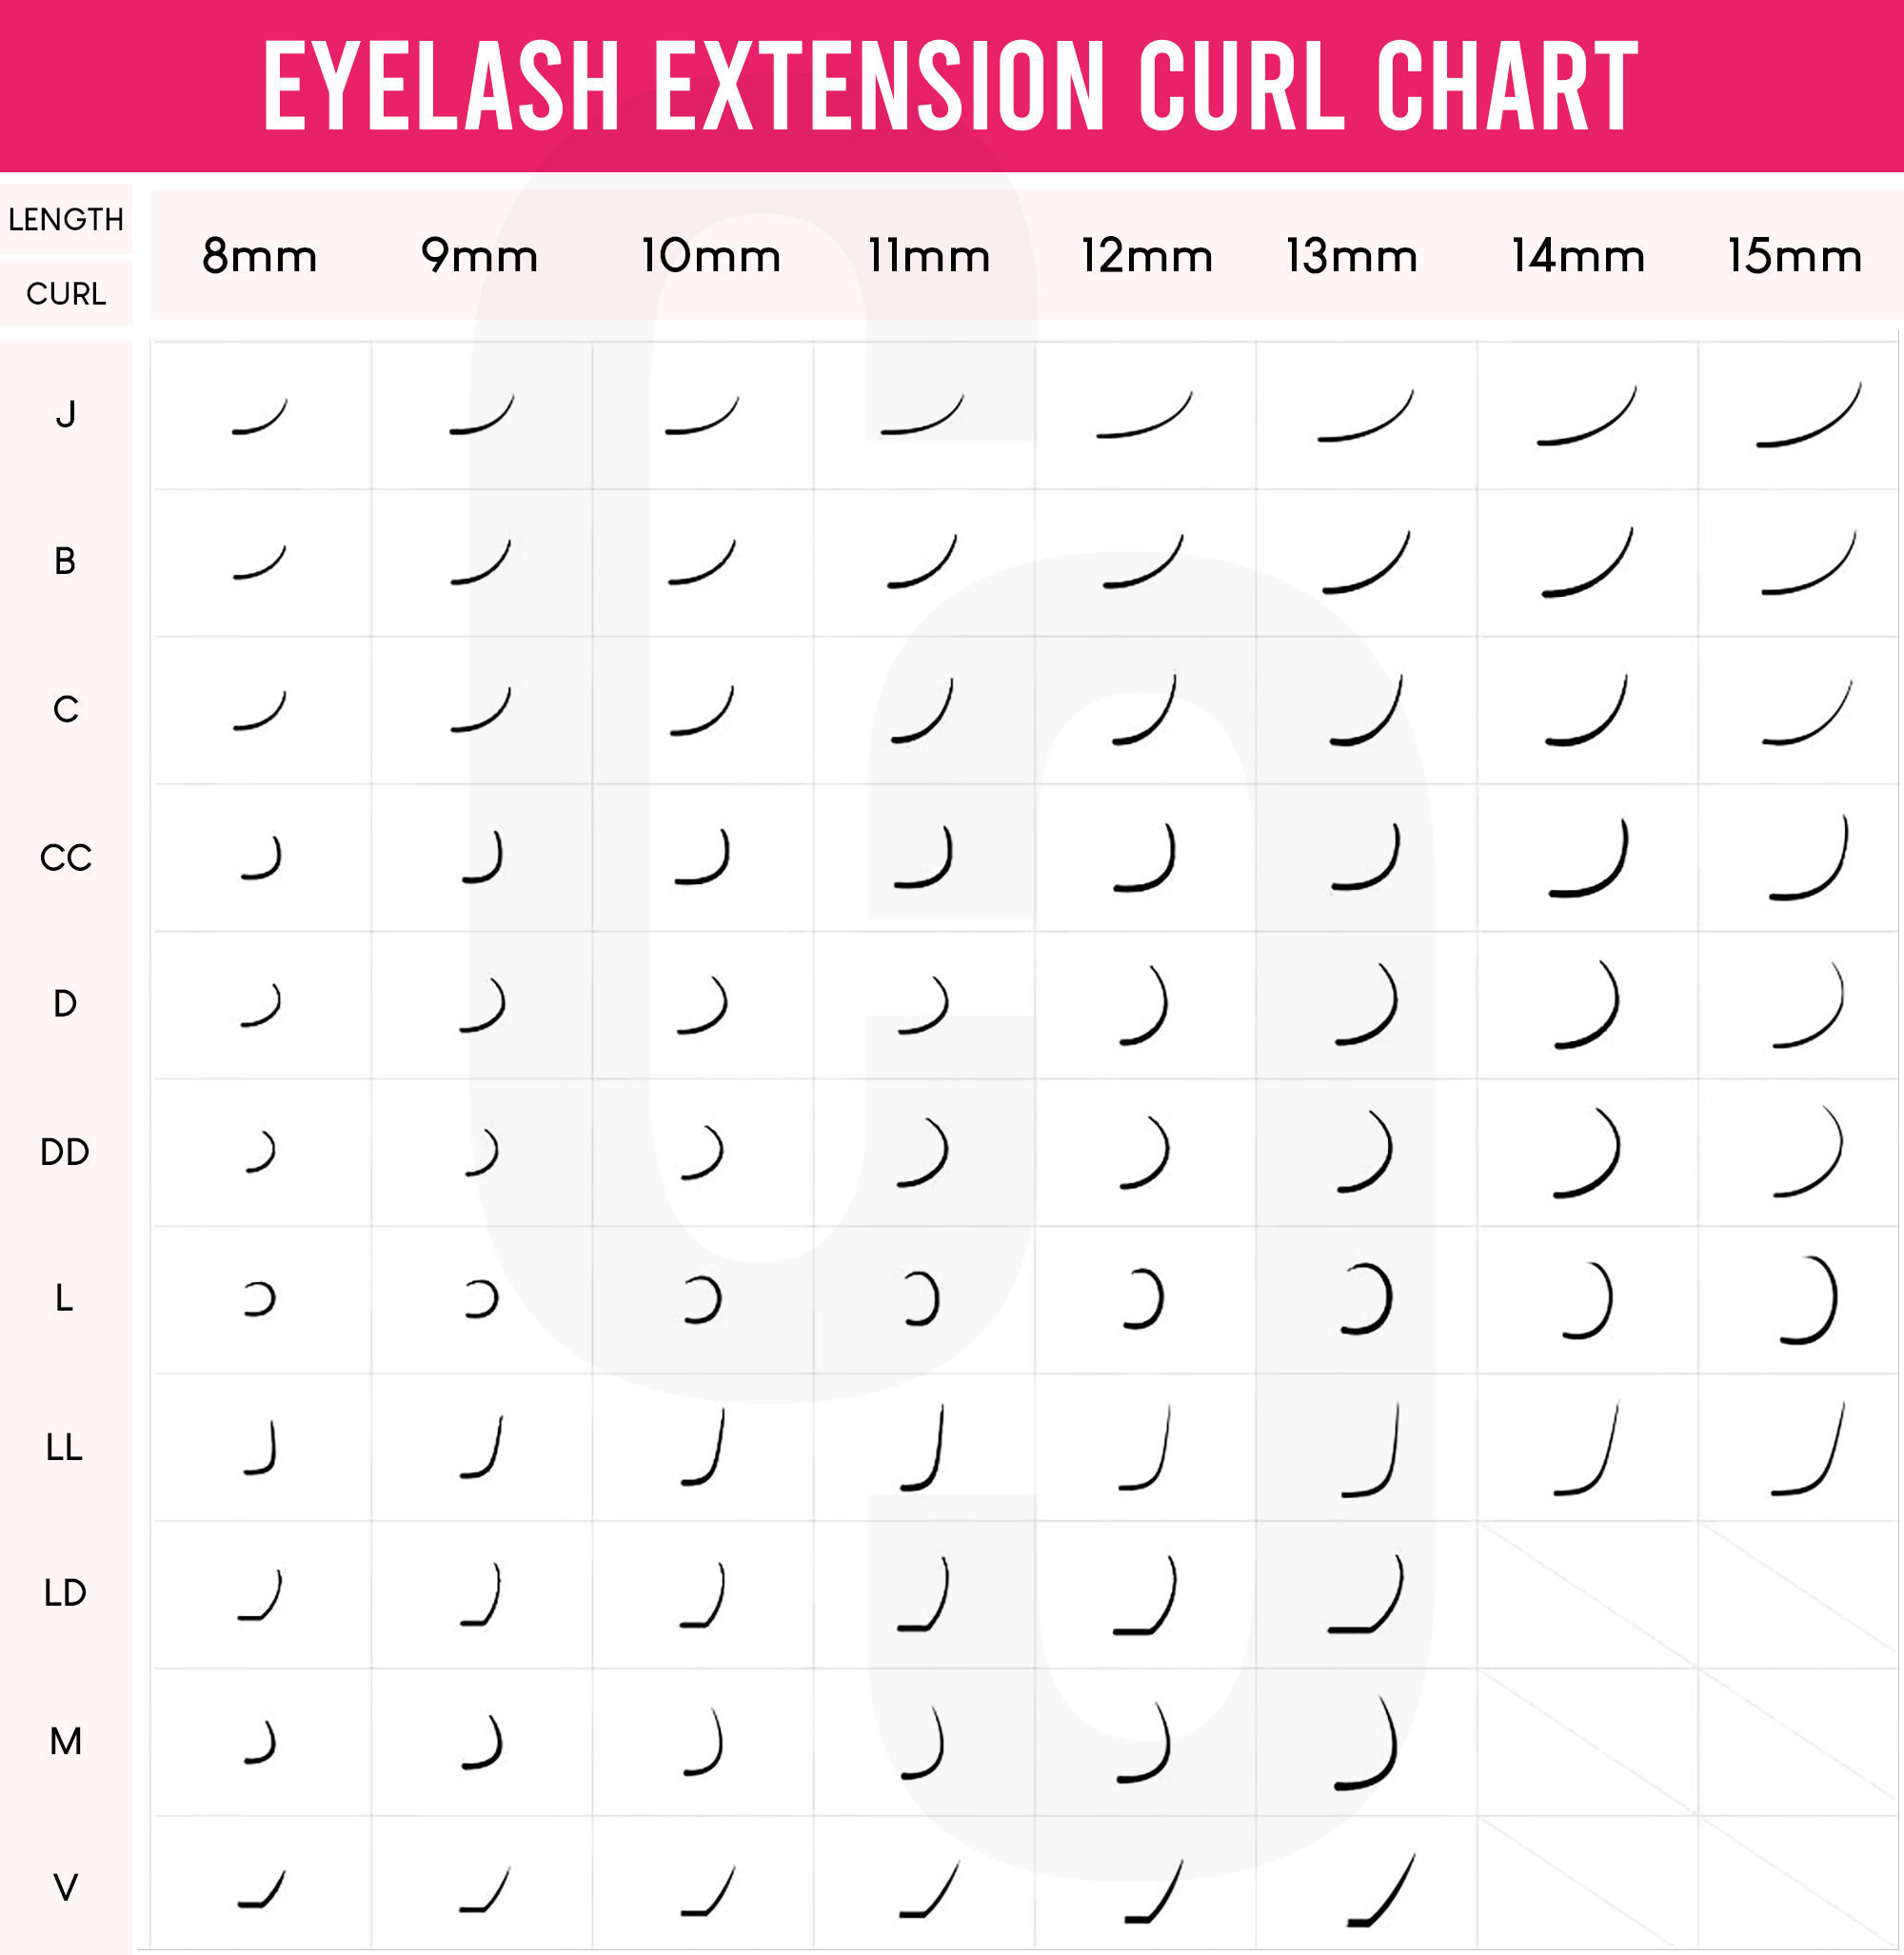 different lash curls - with a variety of length